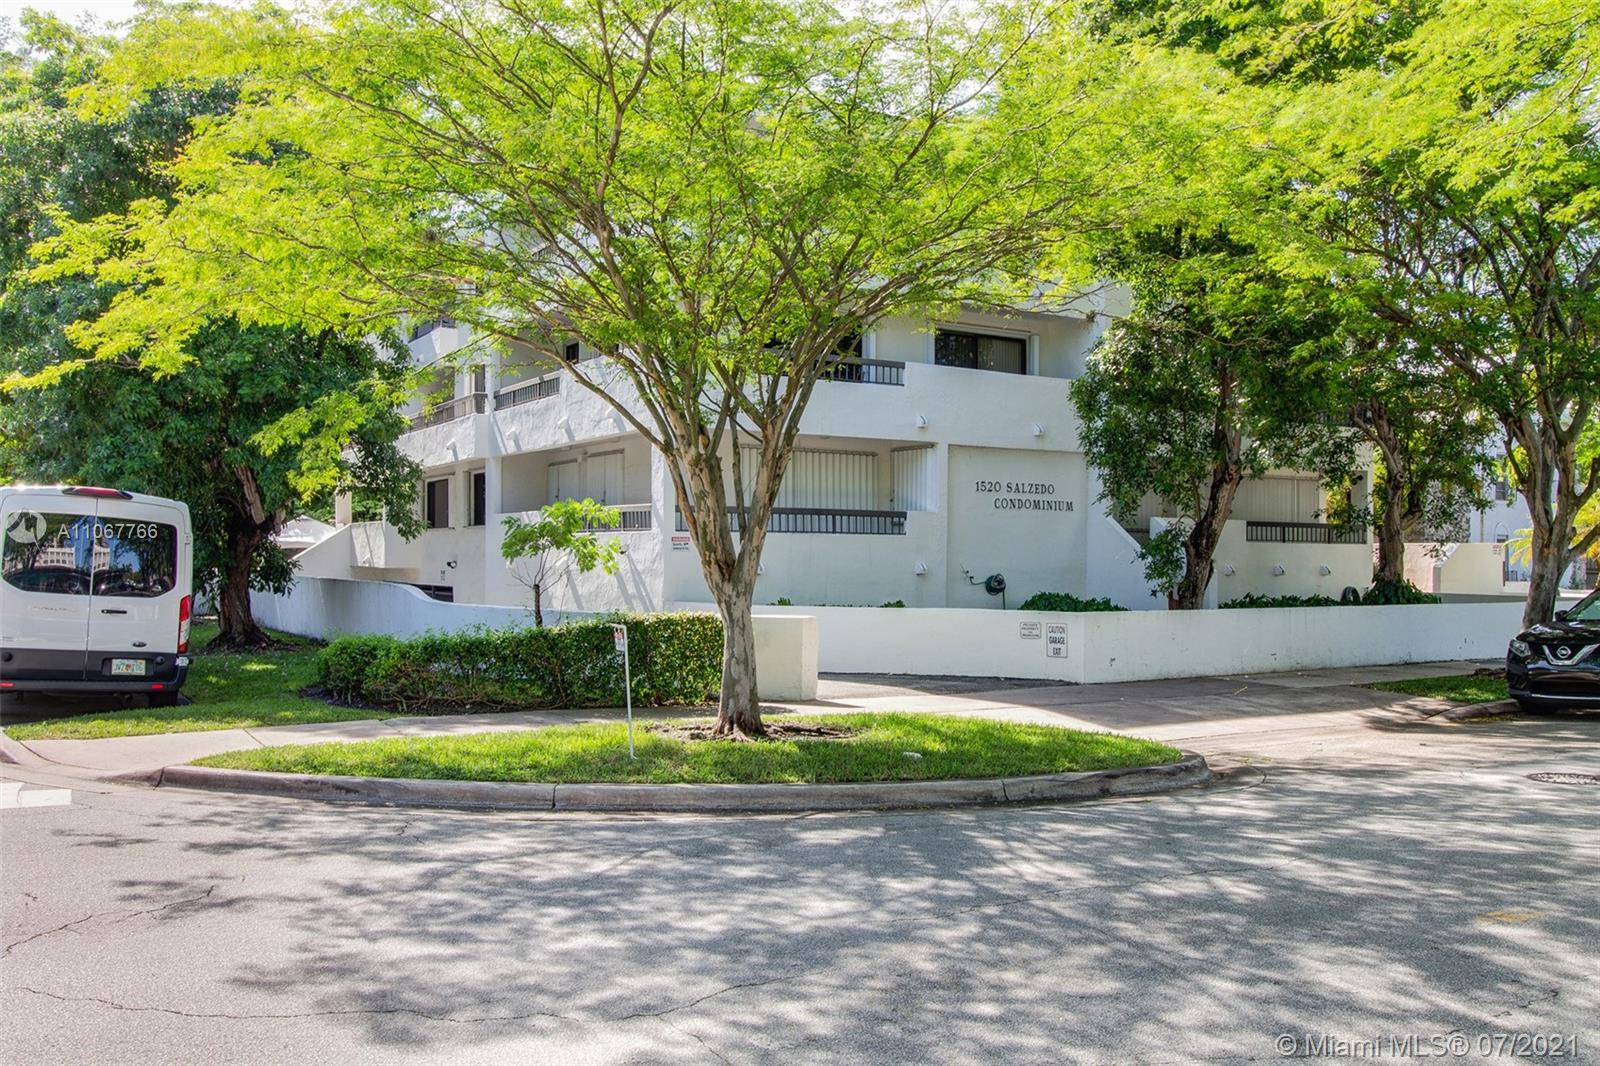 Top Floor, Very Spacious, 2 BR/2.5 BA, Light Filled Corner apt on Quiet Tree Lined Street. 2 Story Split Floor Plan in a Mediterranean style 7 unit community with low maintenance cost, Centrally Located in Coral Gables, Walking distance to Miracle Mile and minutes to airport. Remodeled Bathrooms, Kitchen, Granite Counters, Washer/Dryer in unit, Built in Lights, Stainless Steel Appliances, Walk-in Closets, 1 Parking Space, lots of street parking, 2 Large Balconies to enjoy. MUST SEE!!